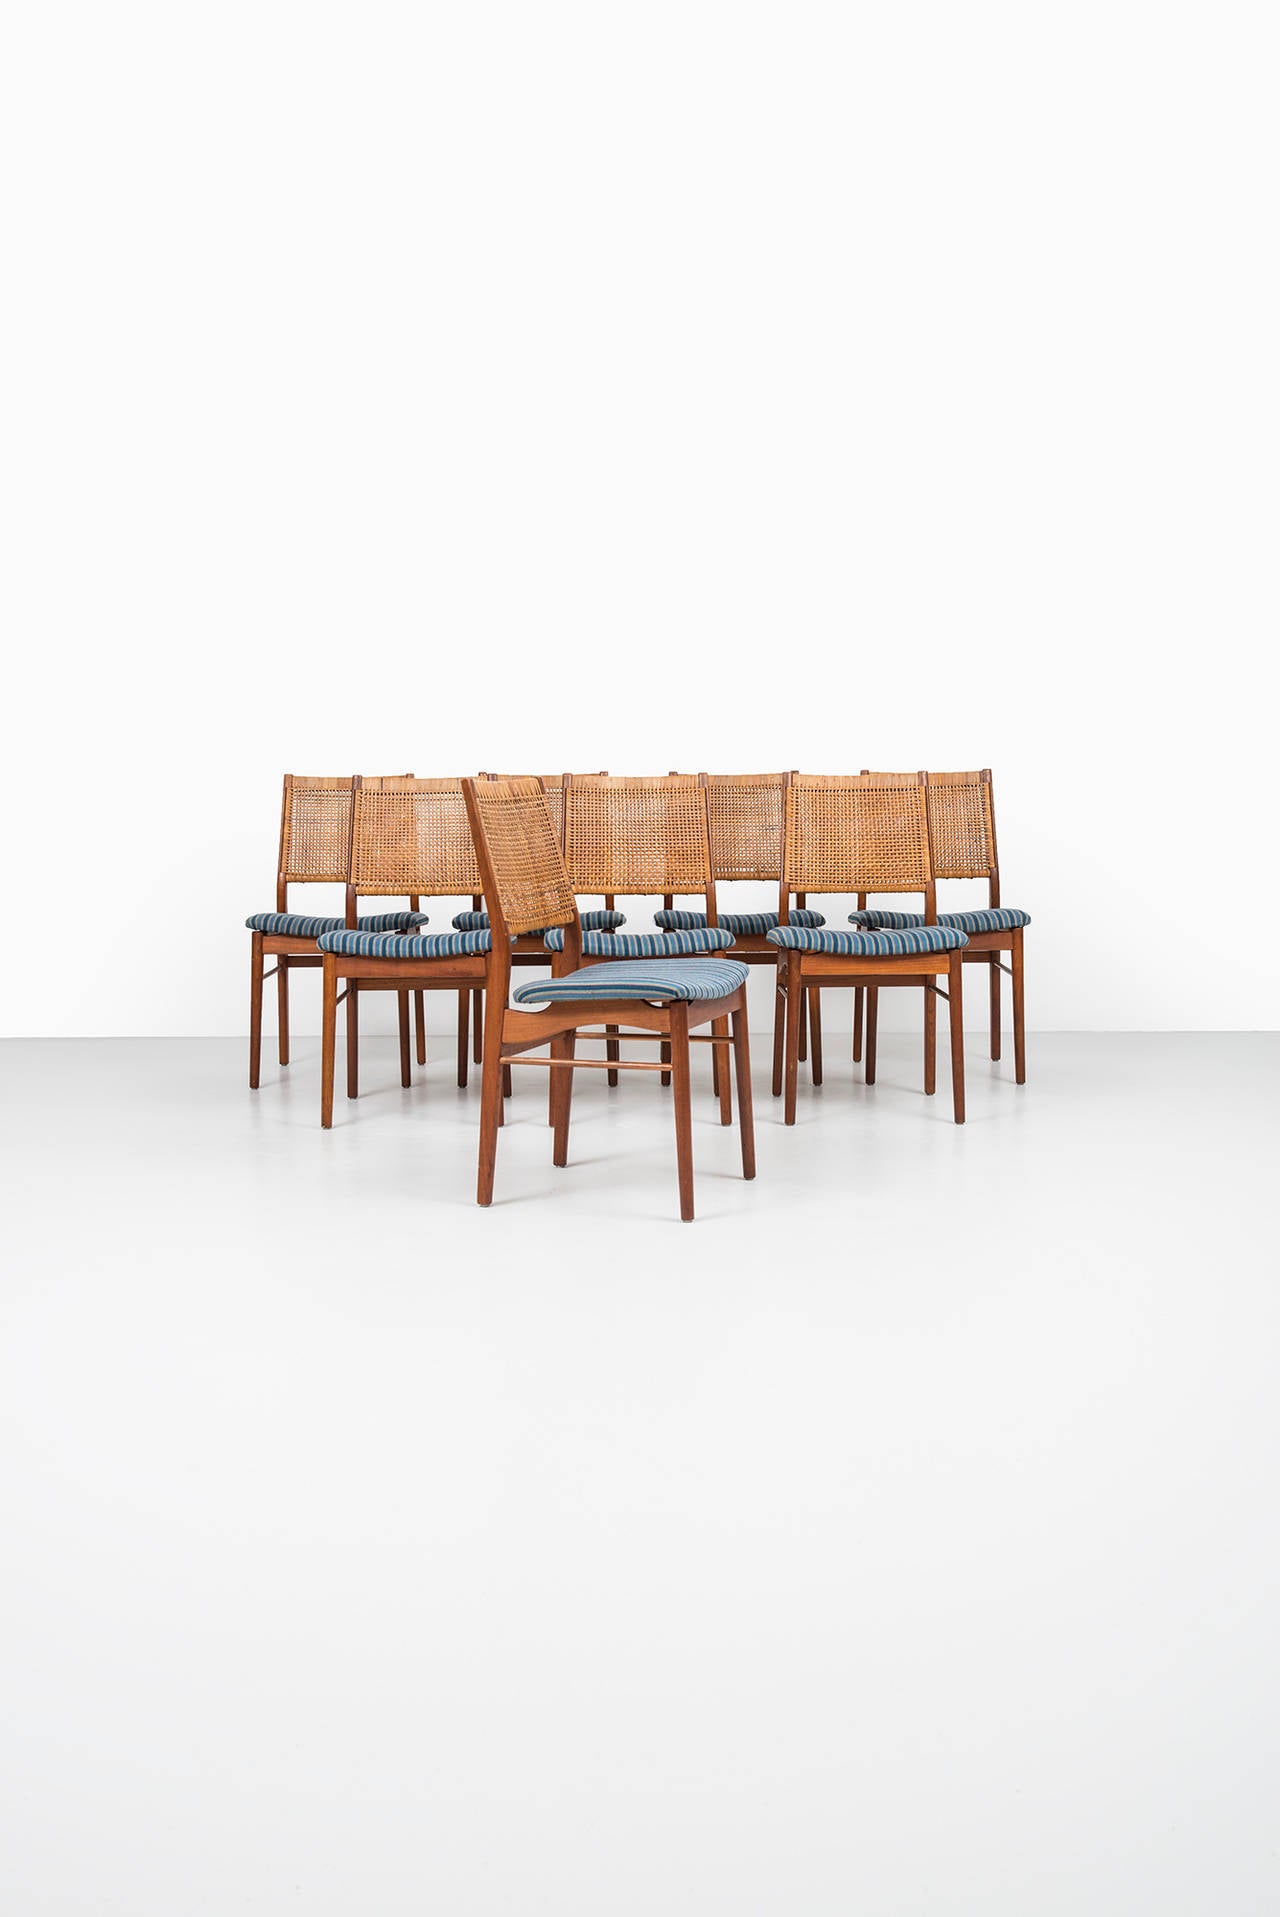 A set of 8 very rare dining chairs model OS 2 designed by Helge Sibast. Produced by Sibast møbler in Denmark.